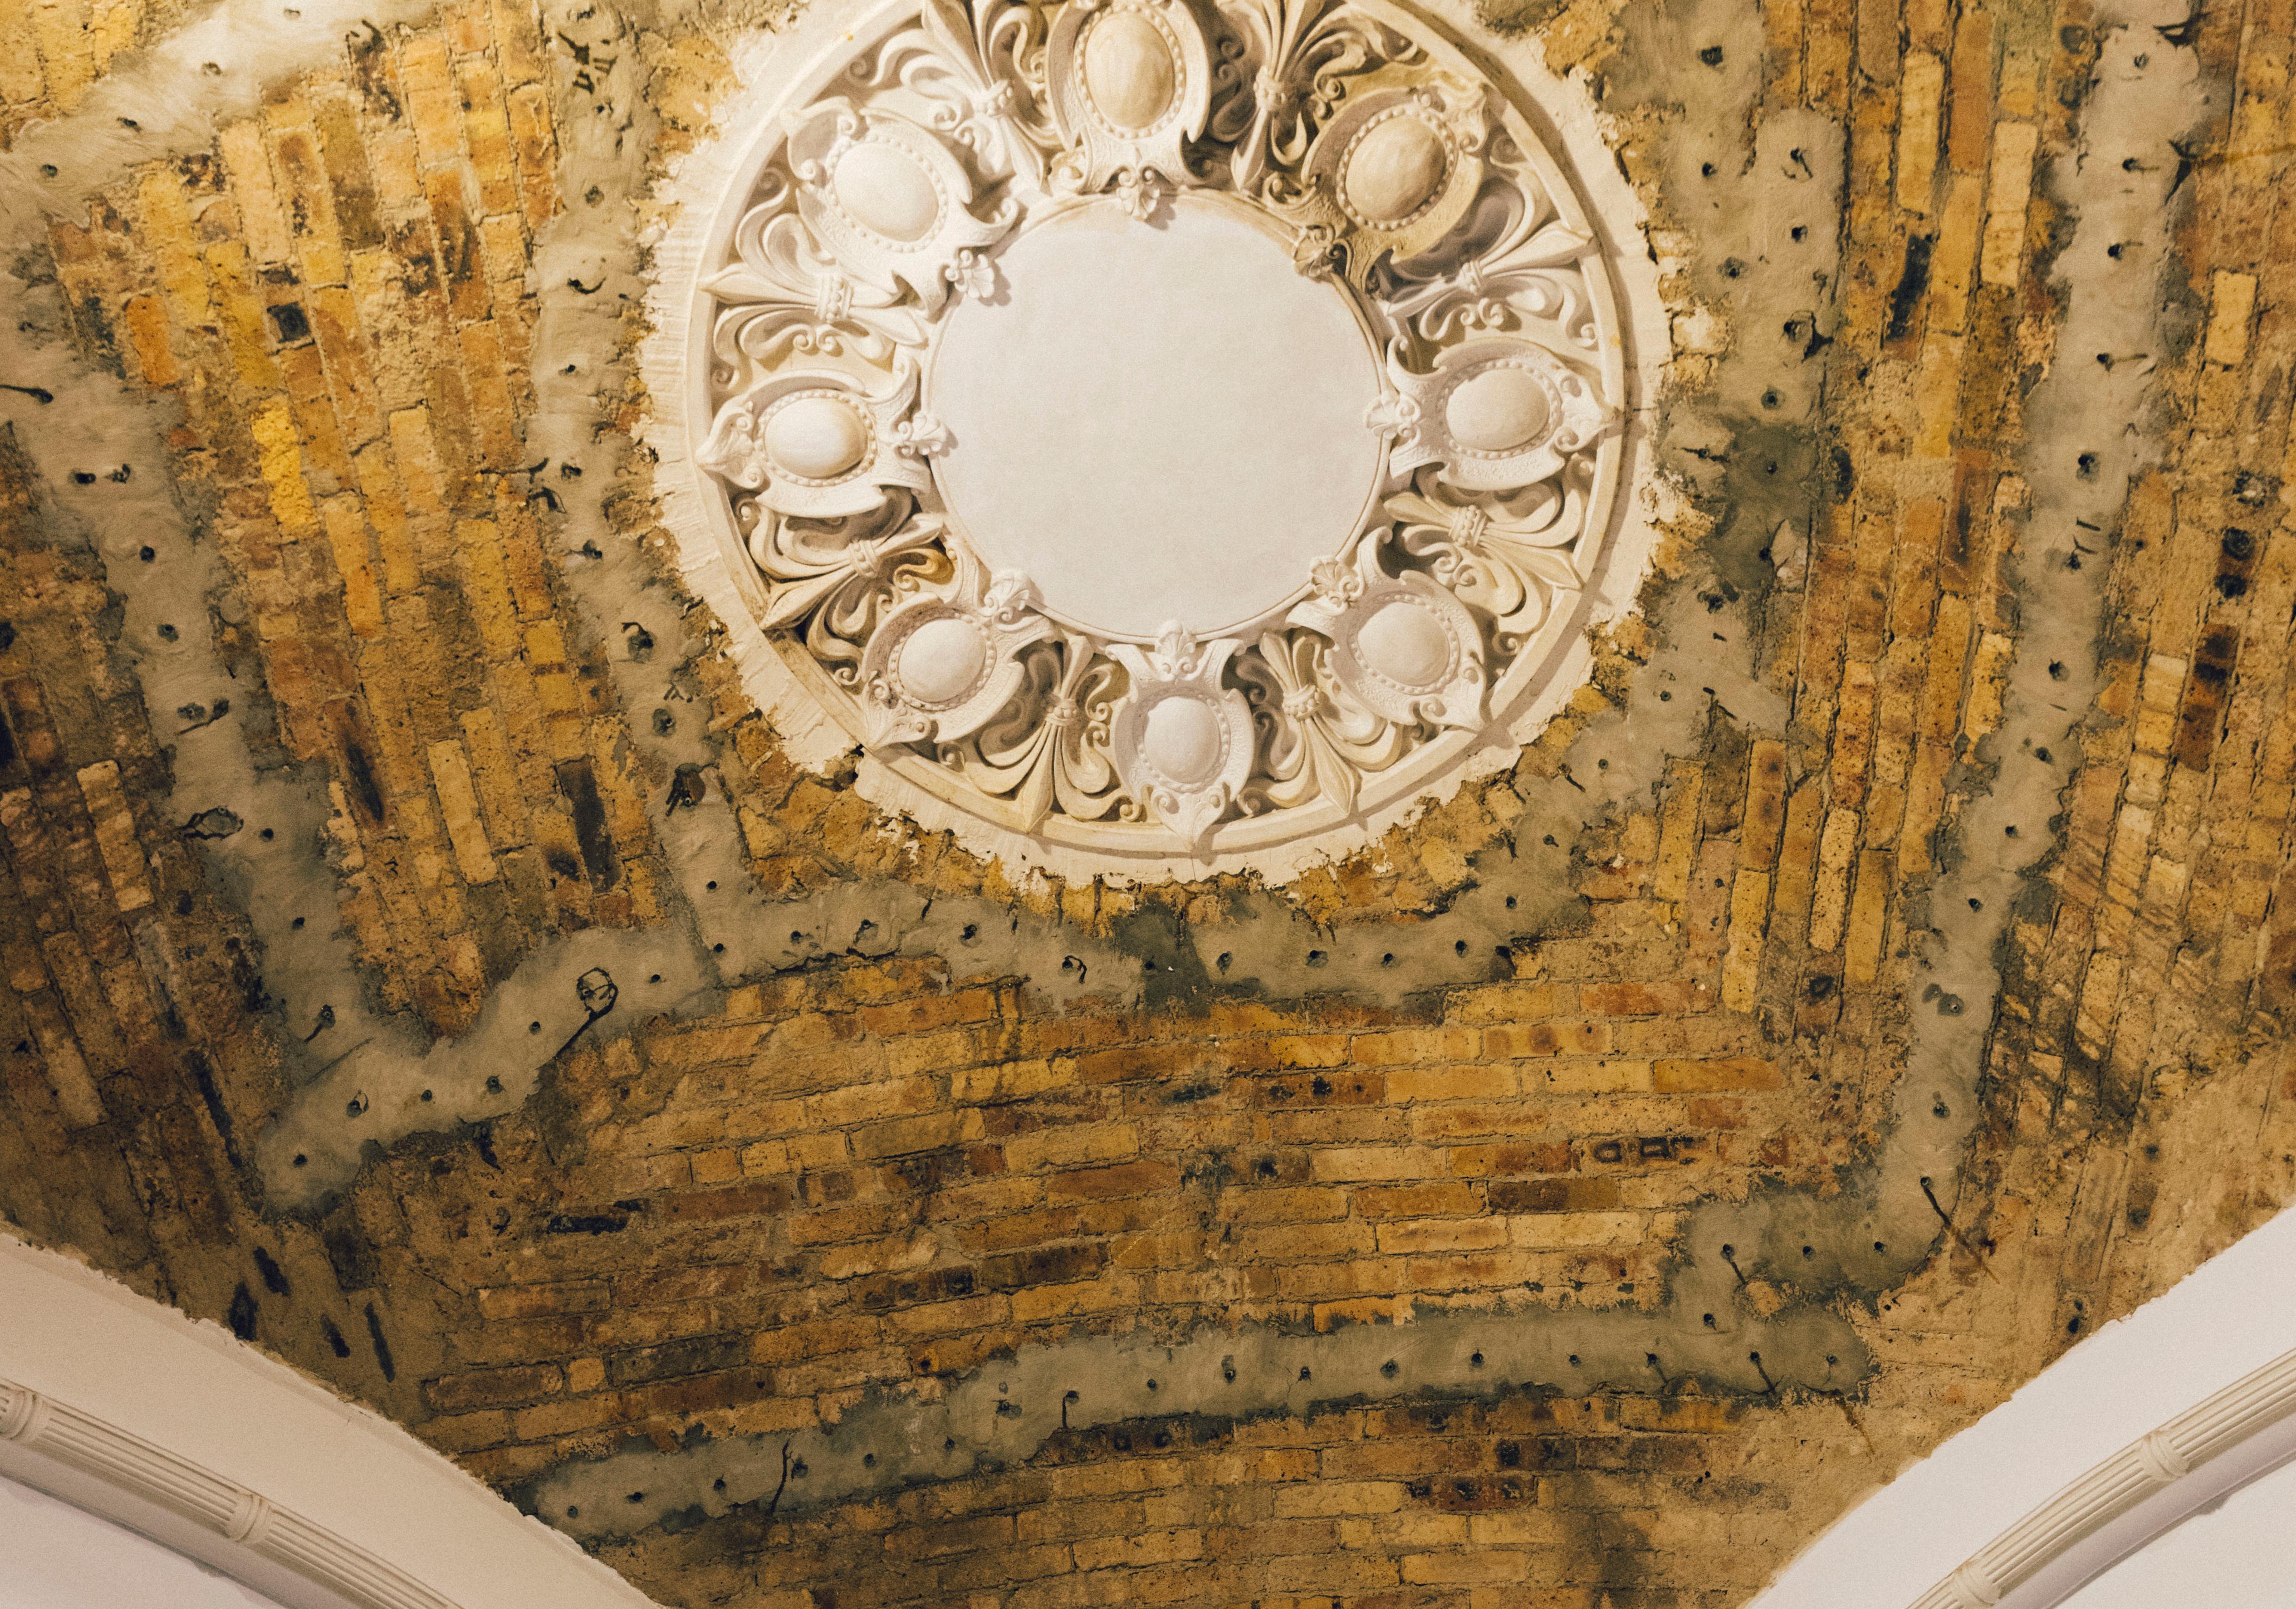 Detail of the partially unplastered ceiling of the Gropius Bau. Traces of damage from World War II.